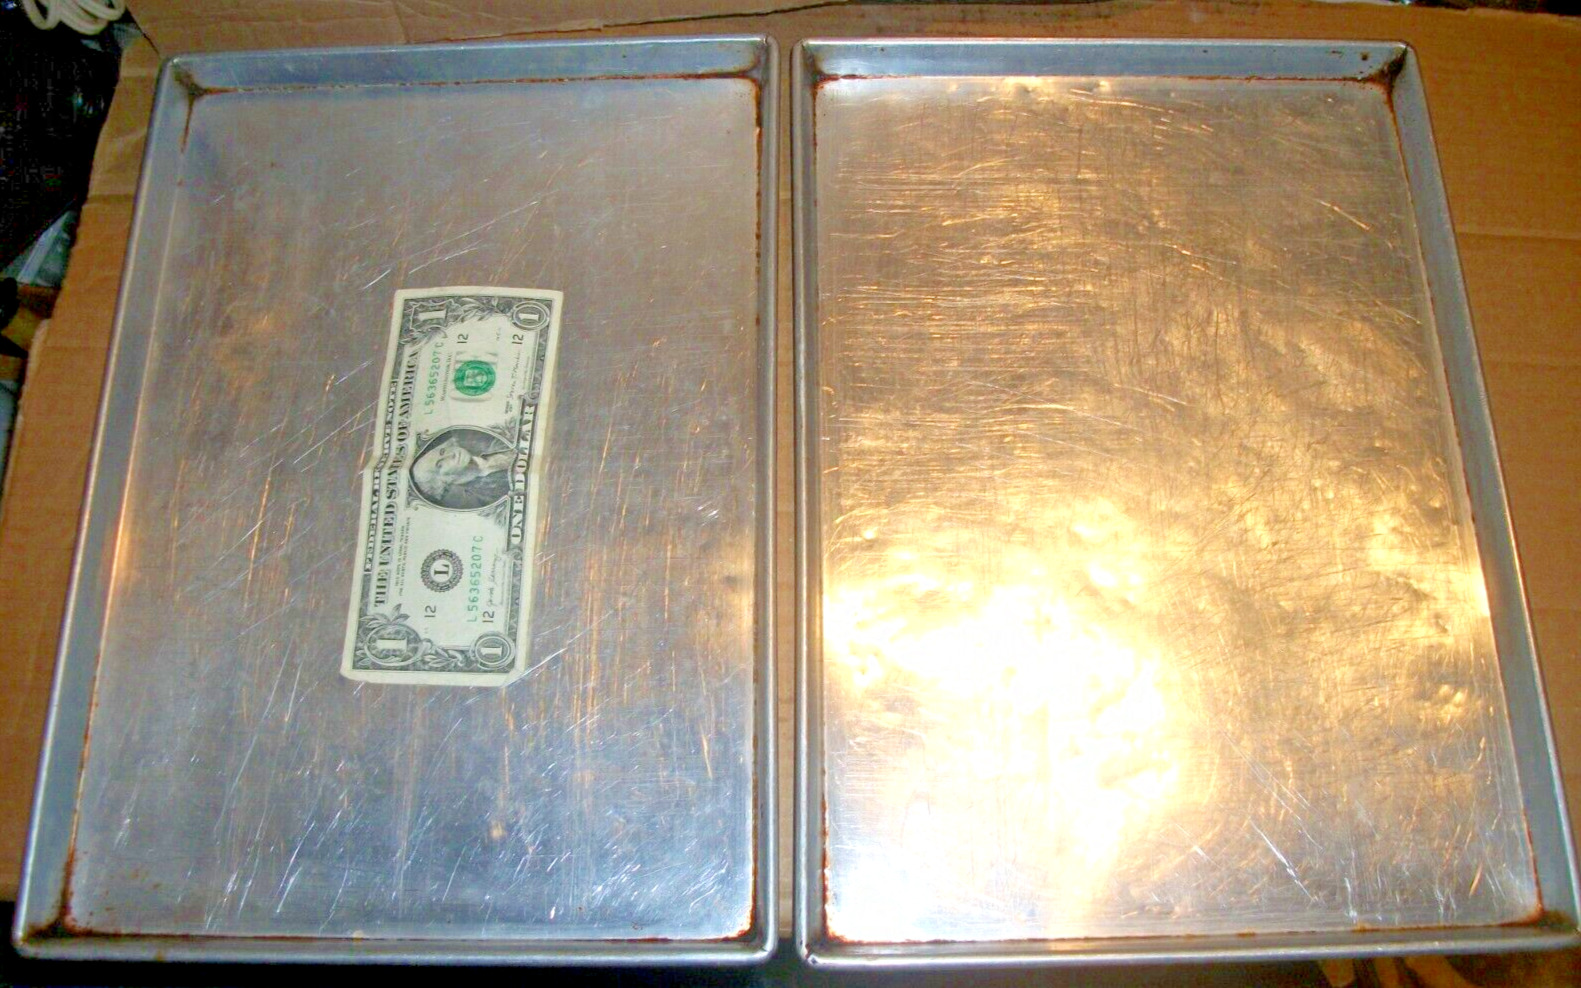 2 Vintage Thin Unbranded Aluminum Cookie Sheet Cake/Baking/Jelly Roll Pans